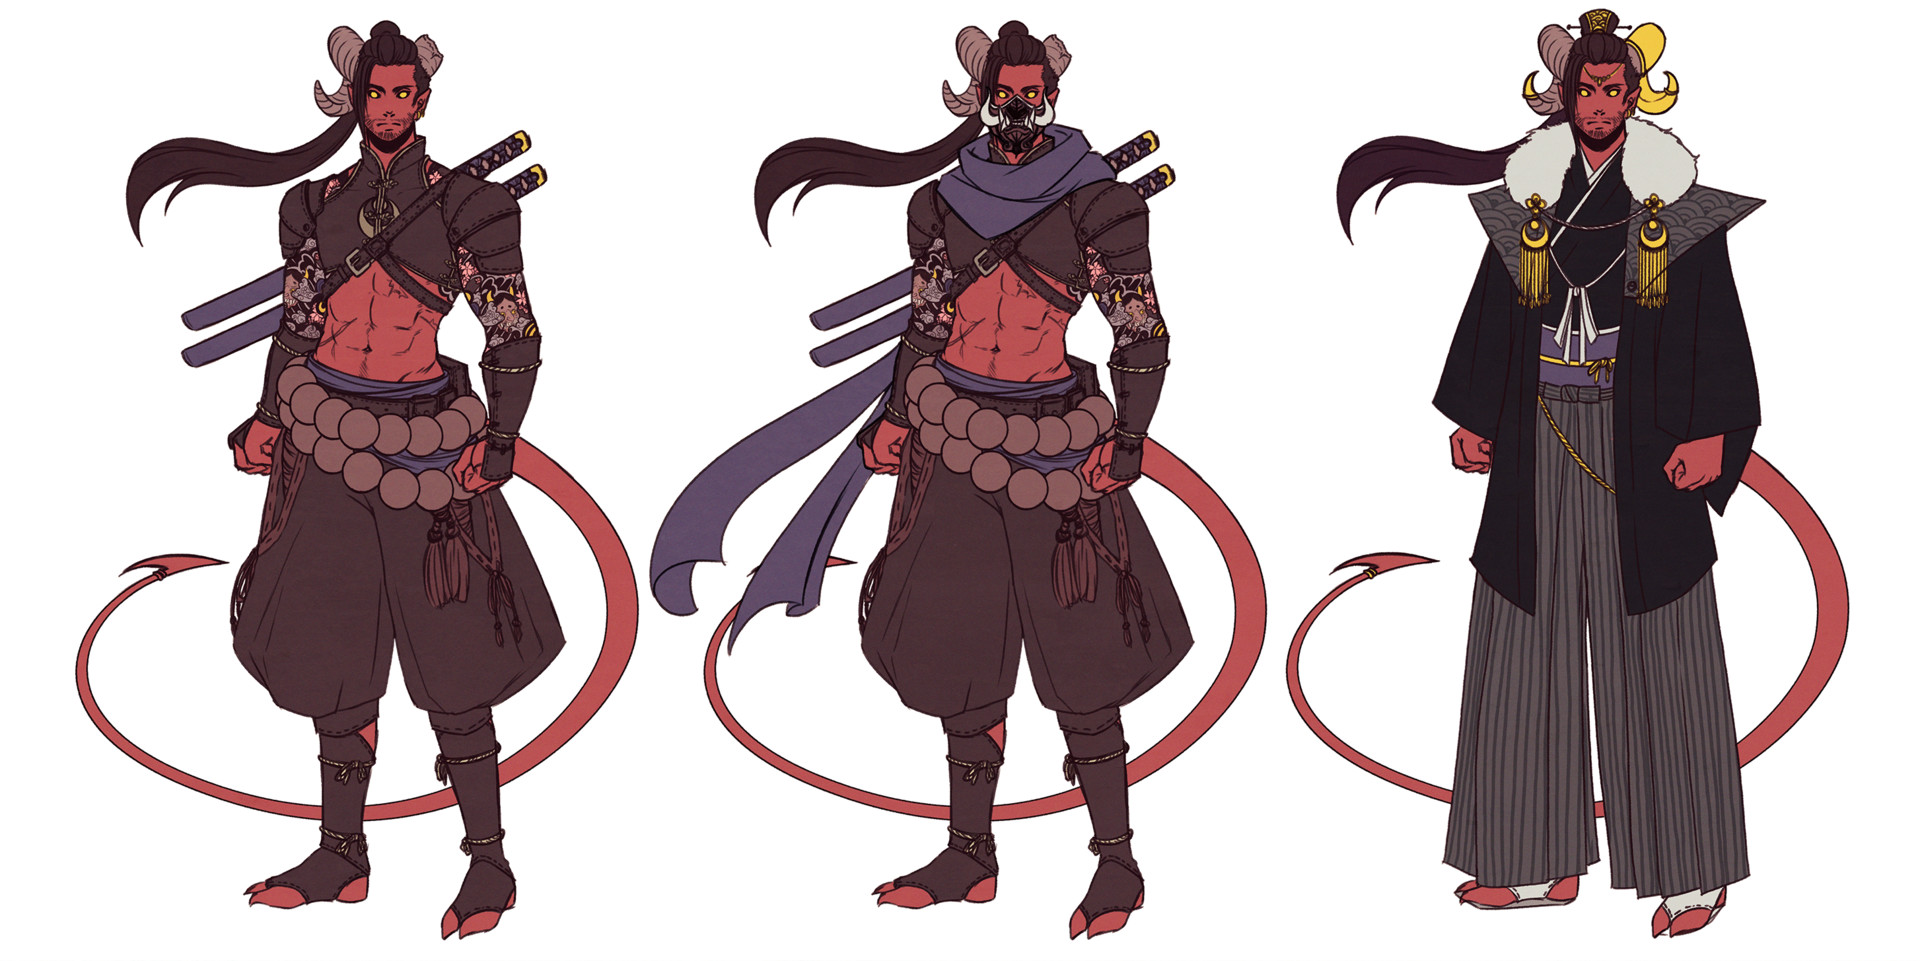 A redesign of Tempest, my tiefling rogue character from a dnd campaign I&ap...